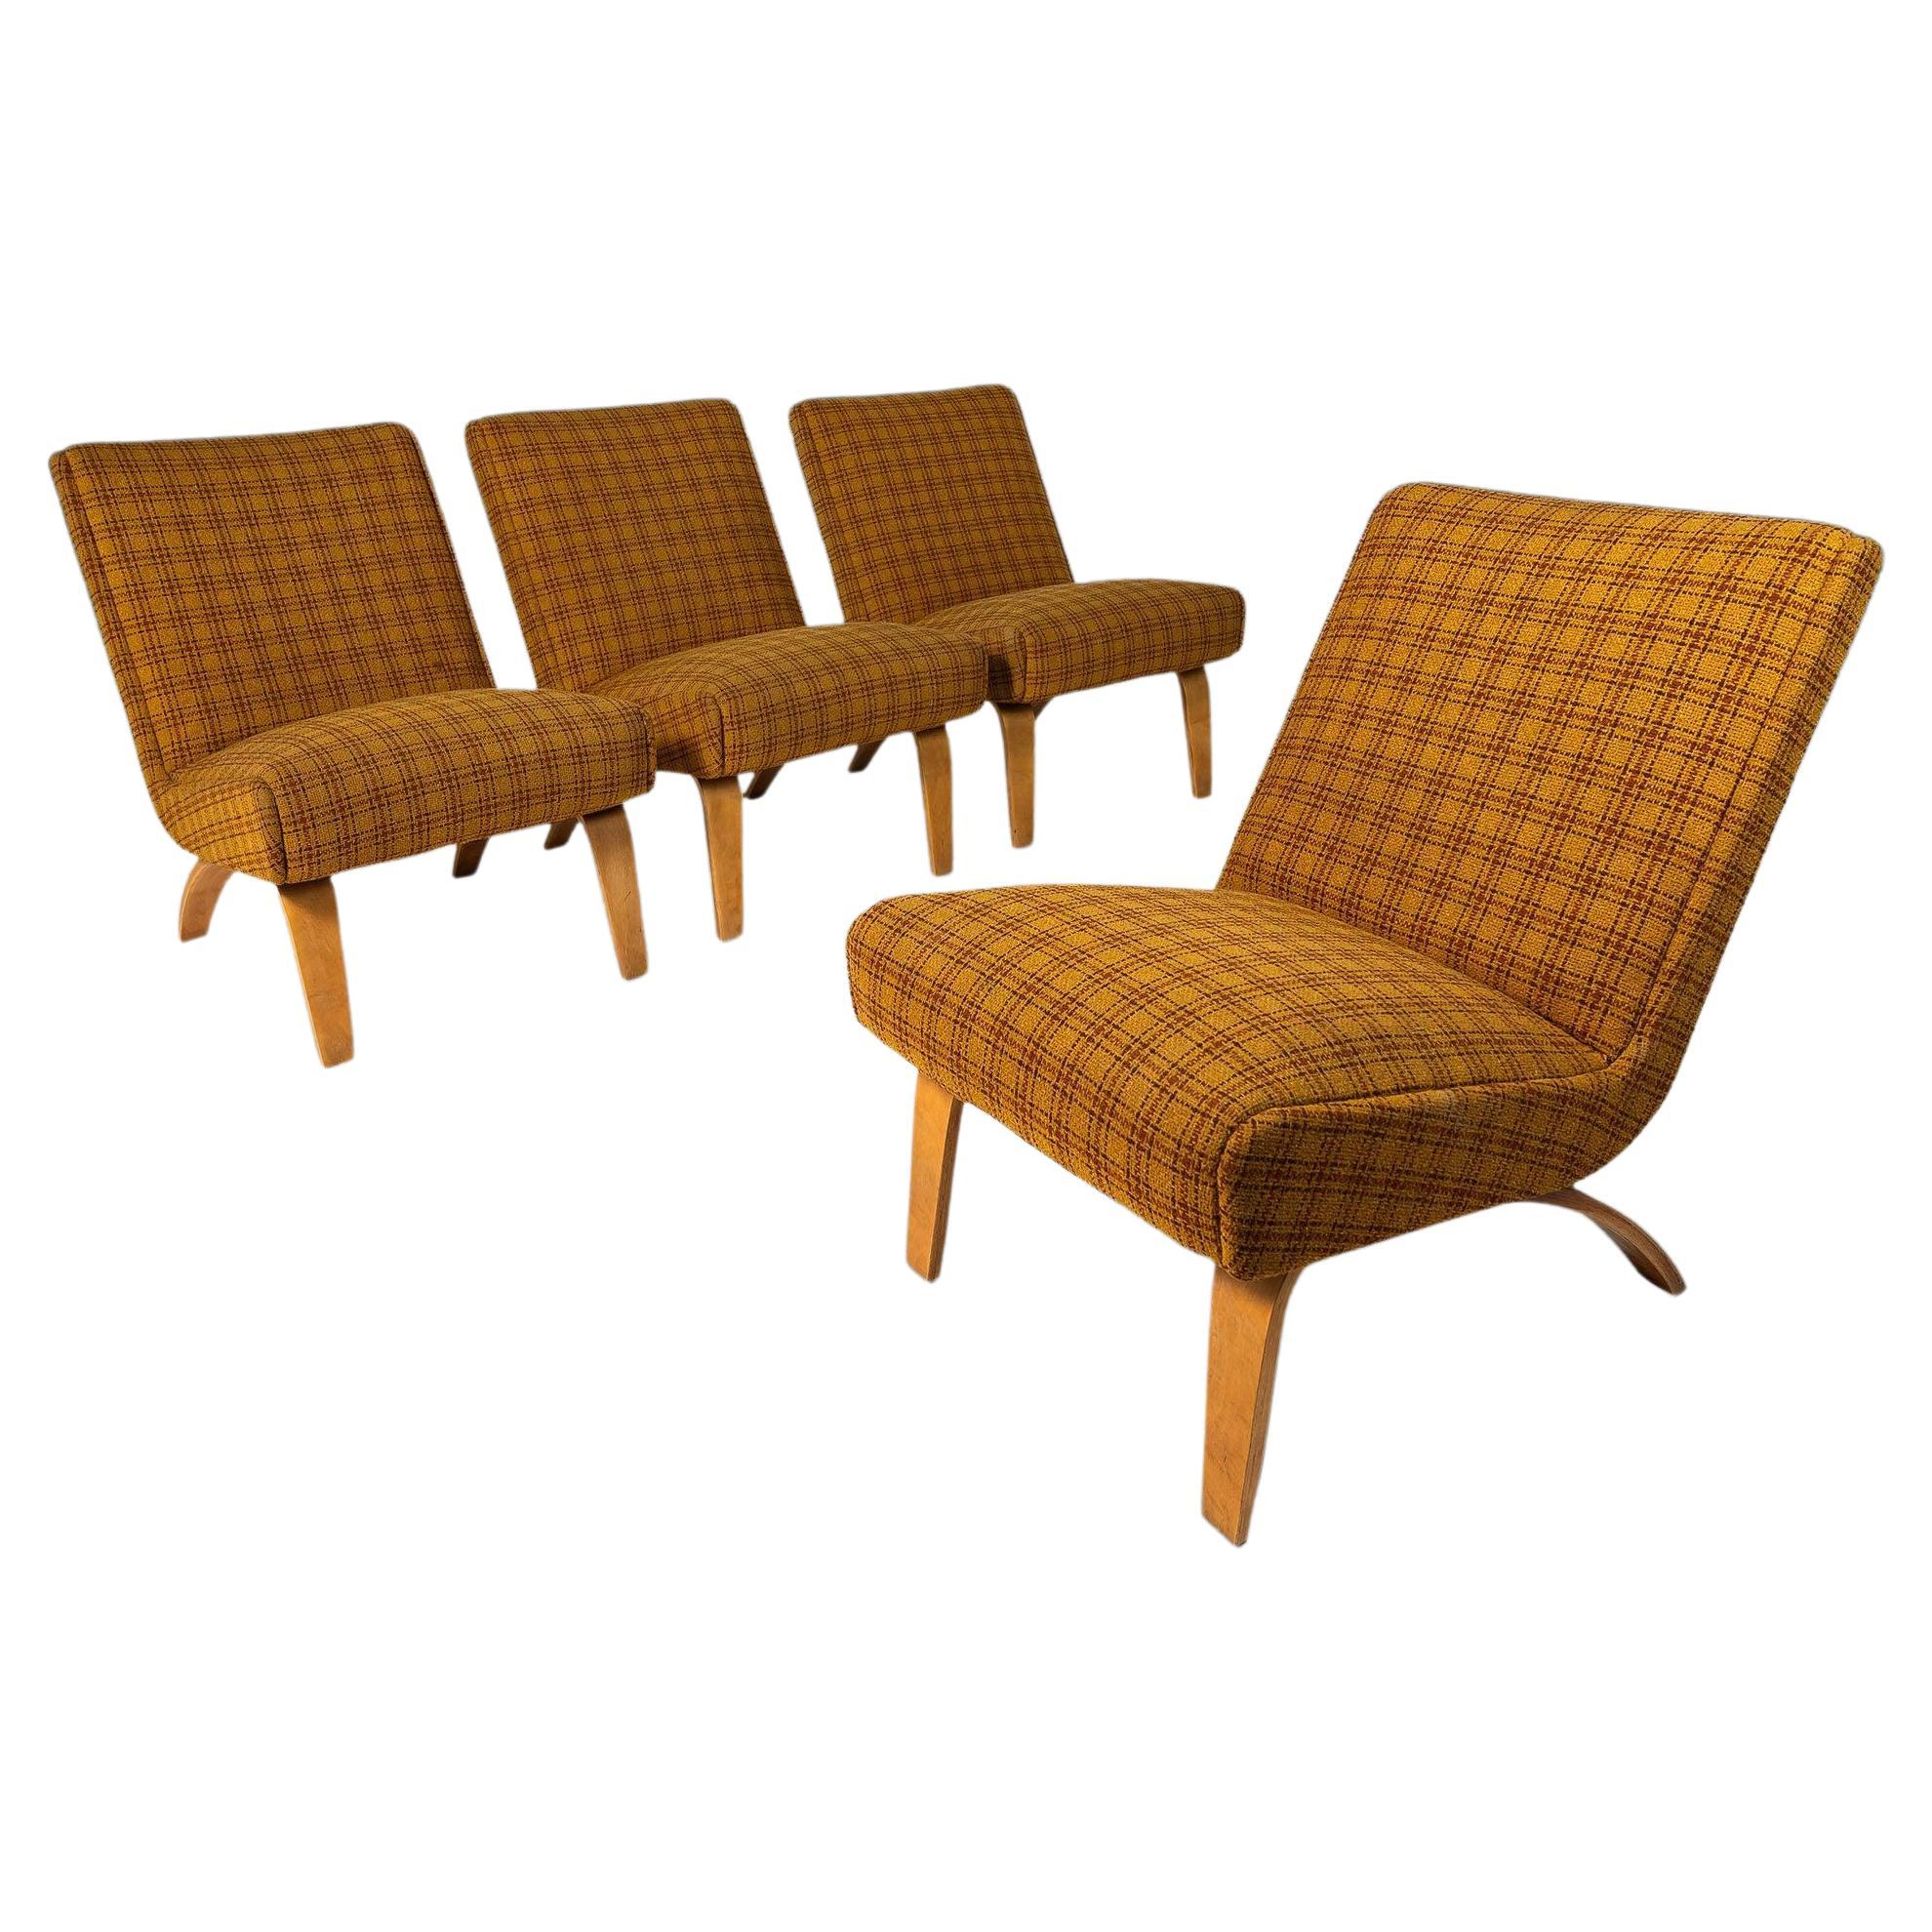 Set of Four '4' Slipper Chairs in Original Yellow Plaid Wool Fabric by Thonet For Sale